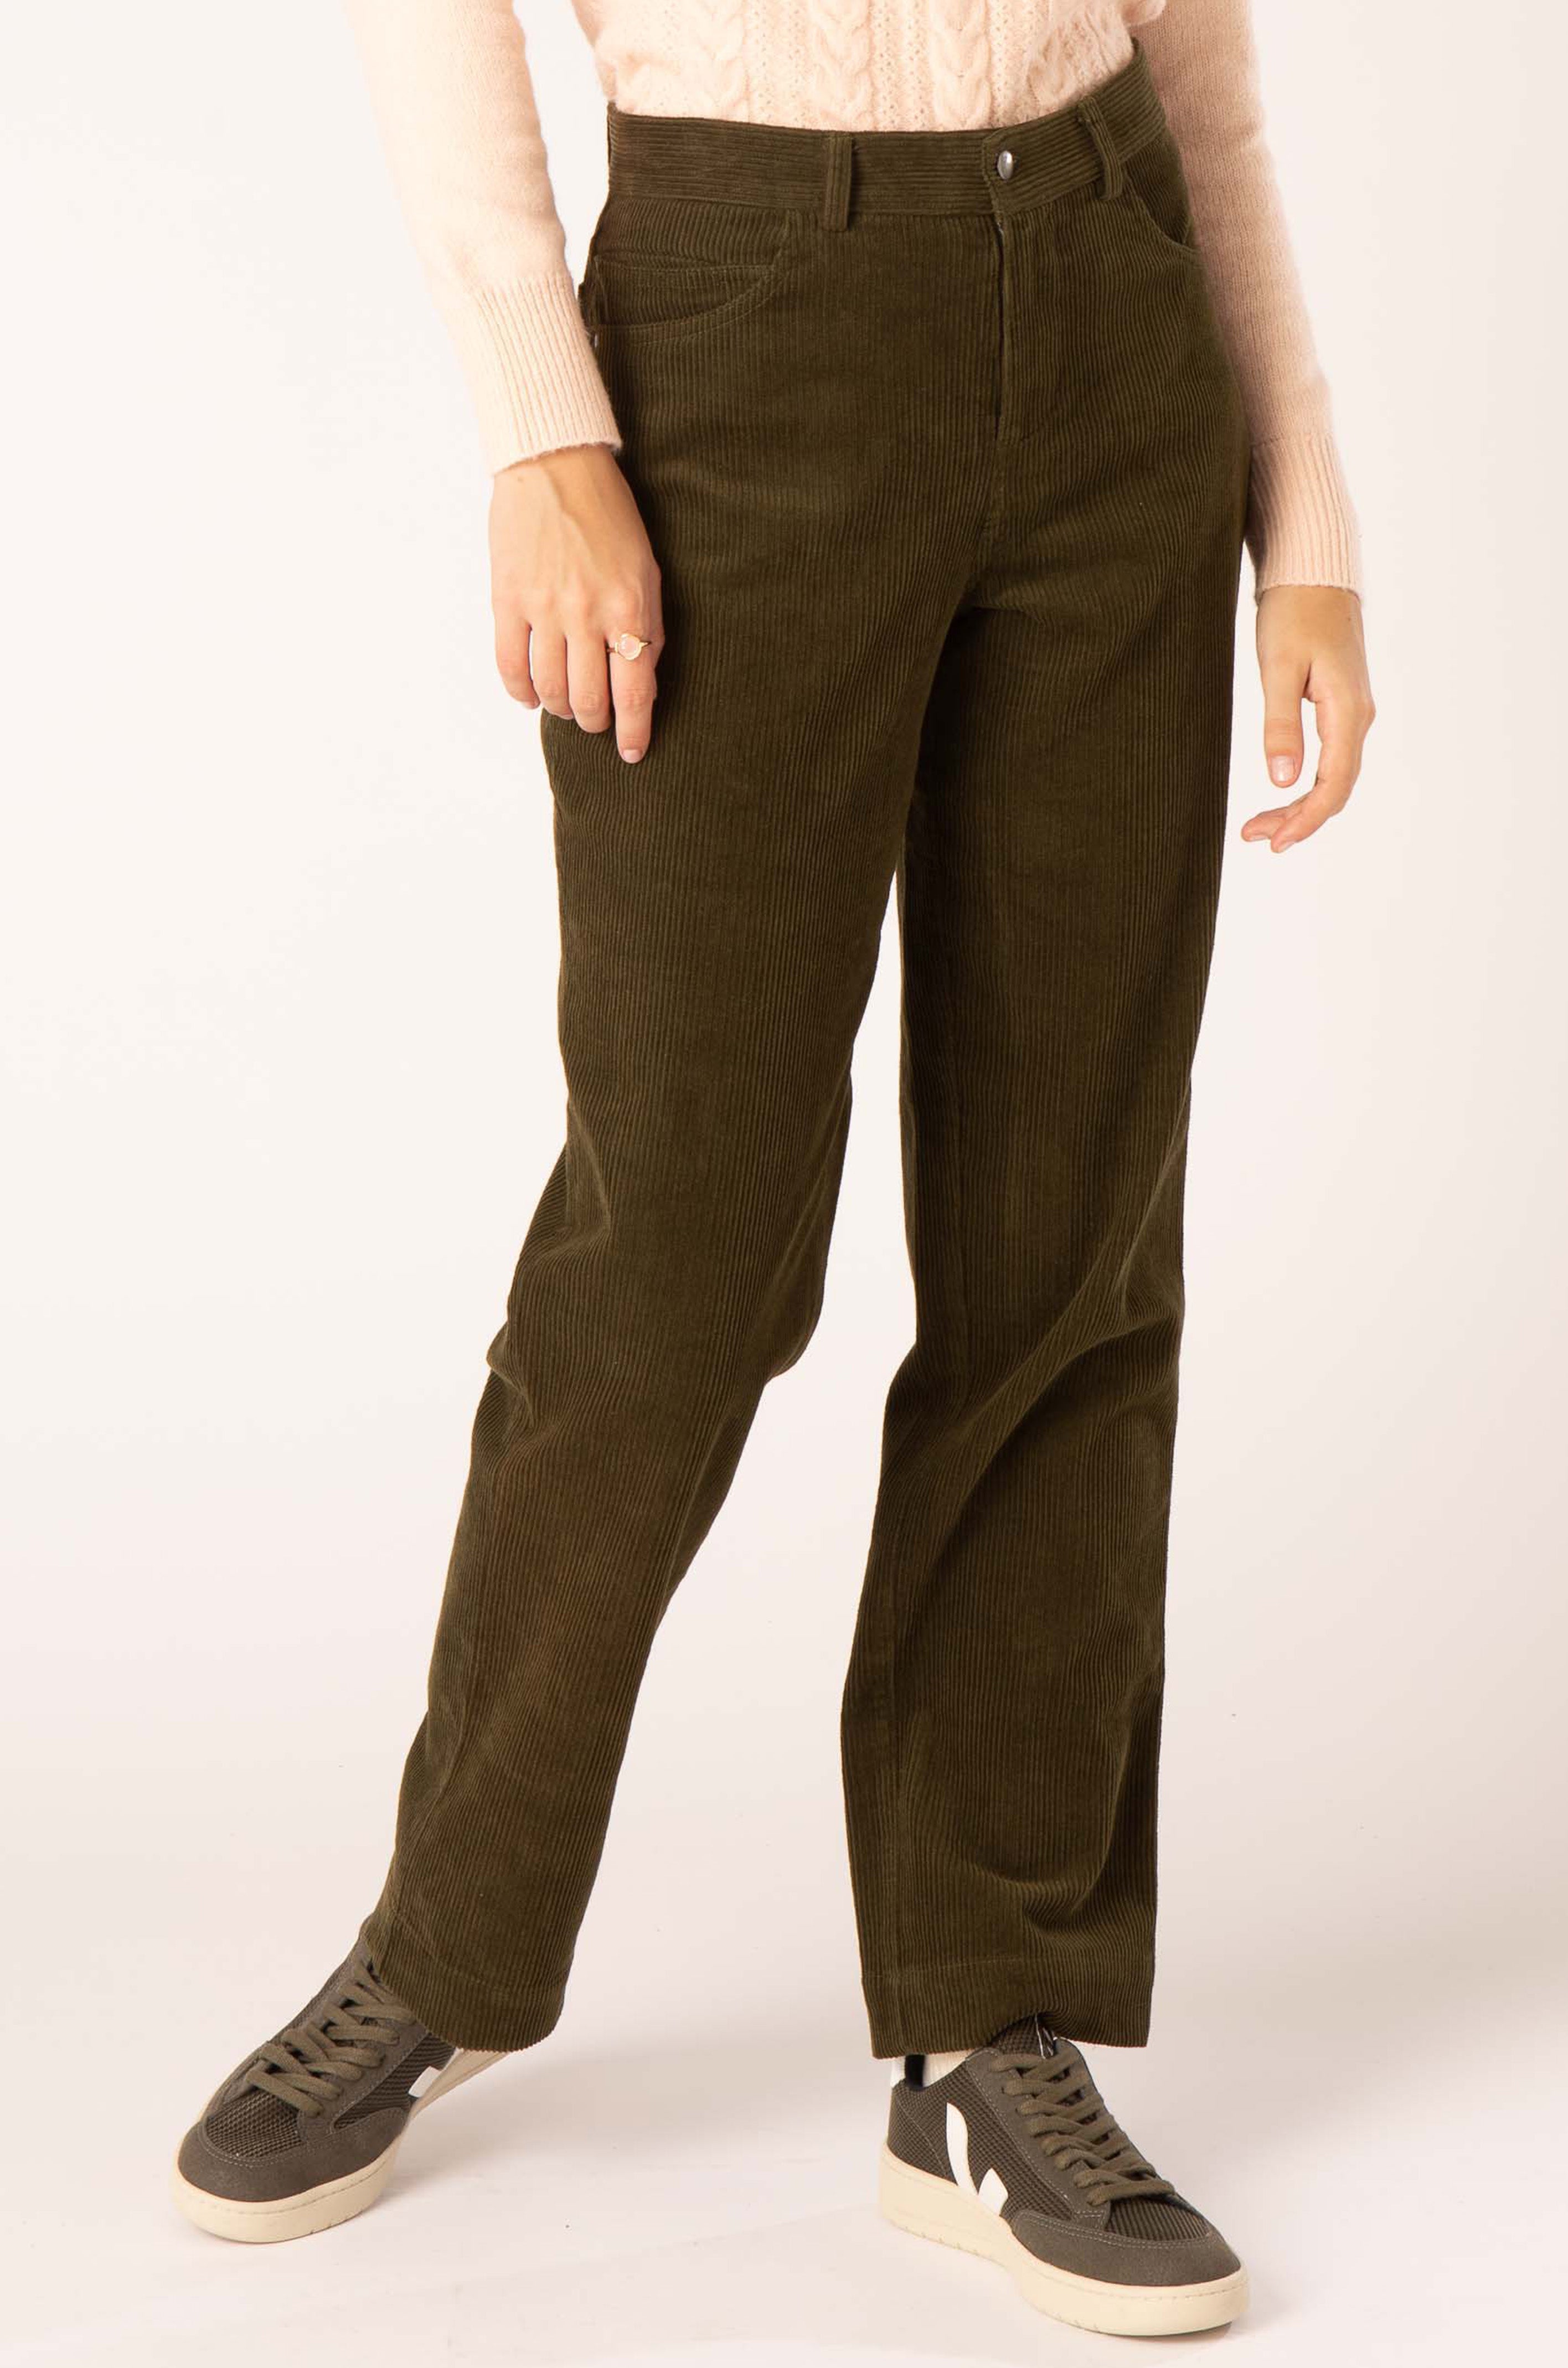 Cord Trouser in Military Olive, Military Olive / 14